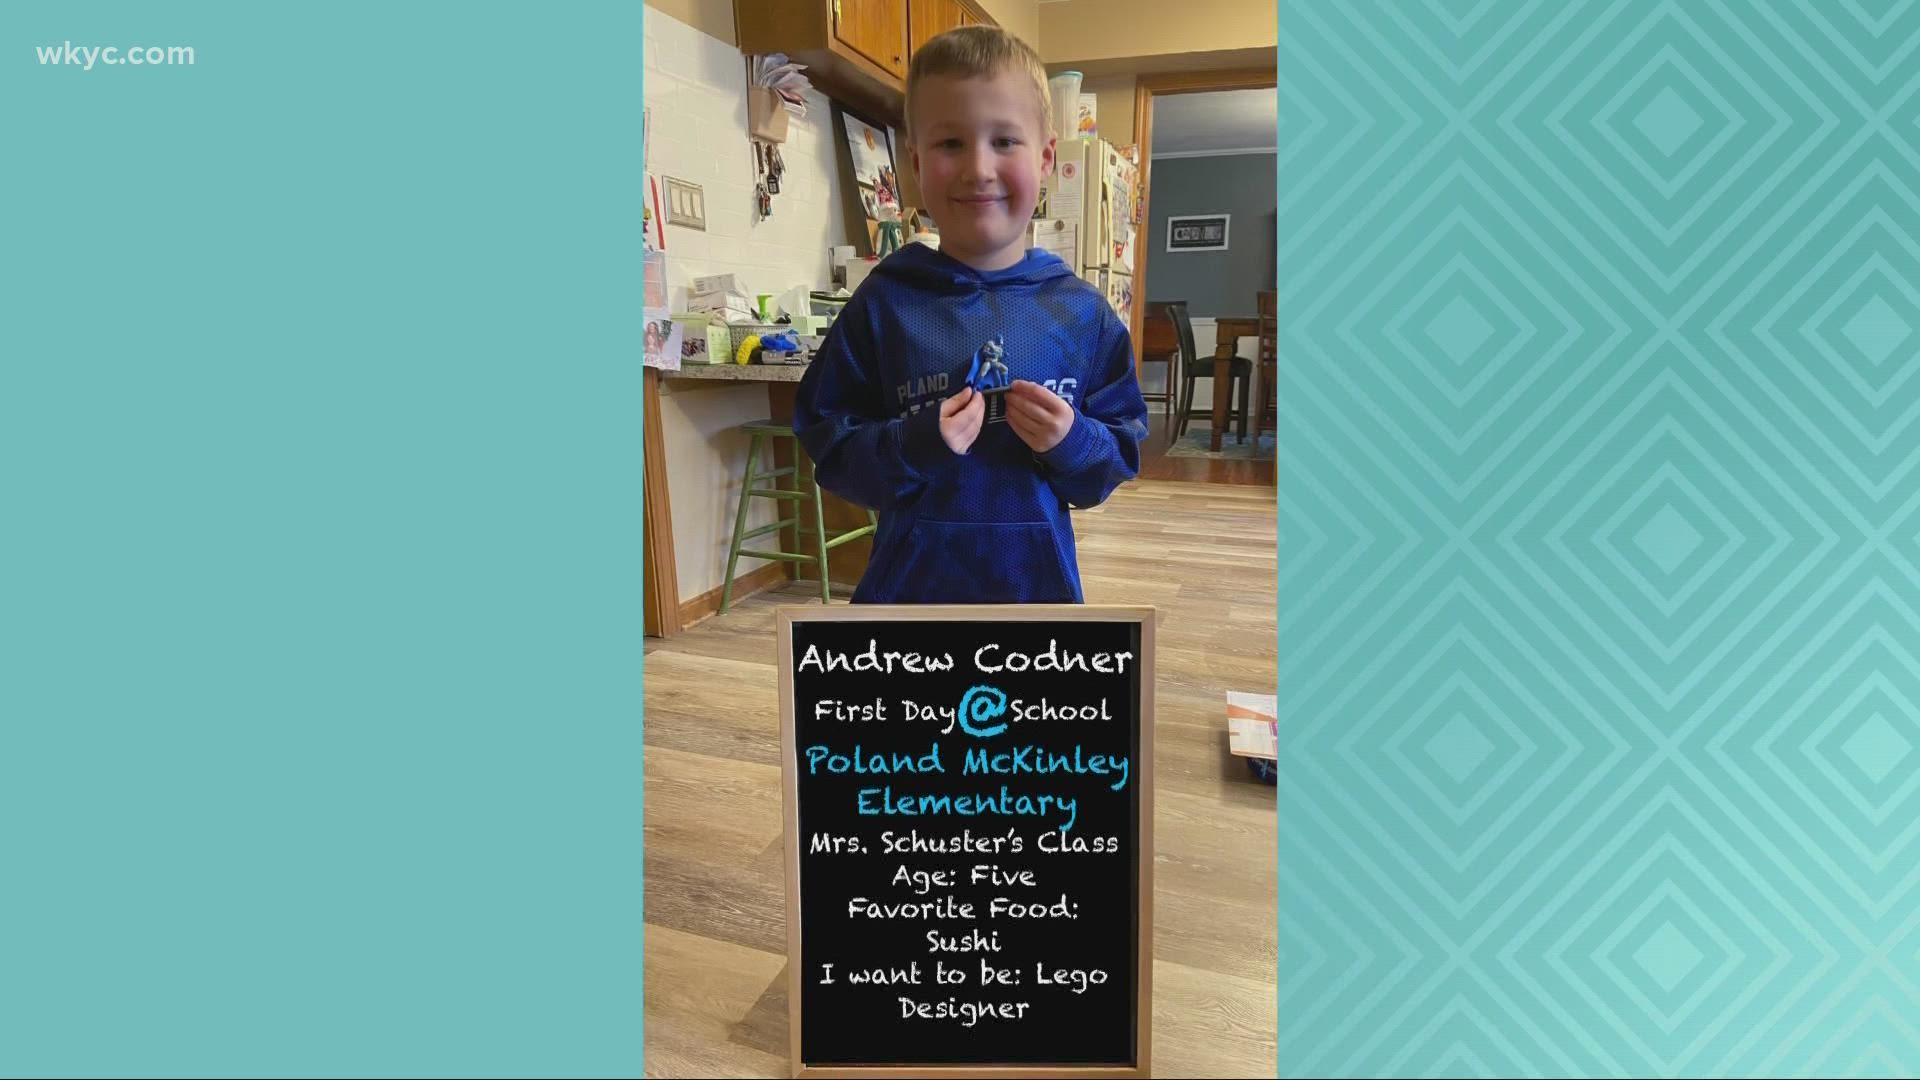 He's been in cancer treatment for nearly two and a half years, but 6-year-old Andrew is nearing the finish line.